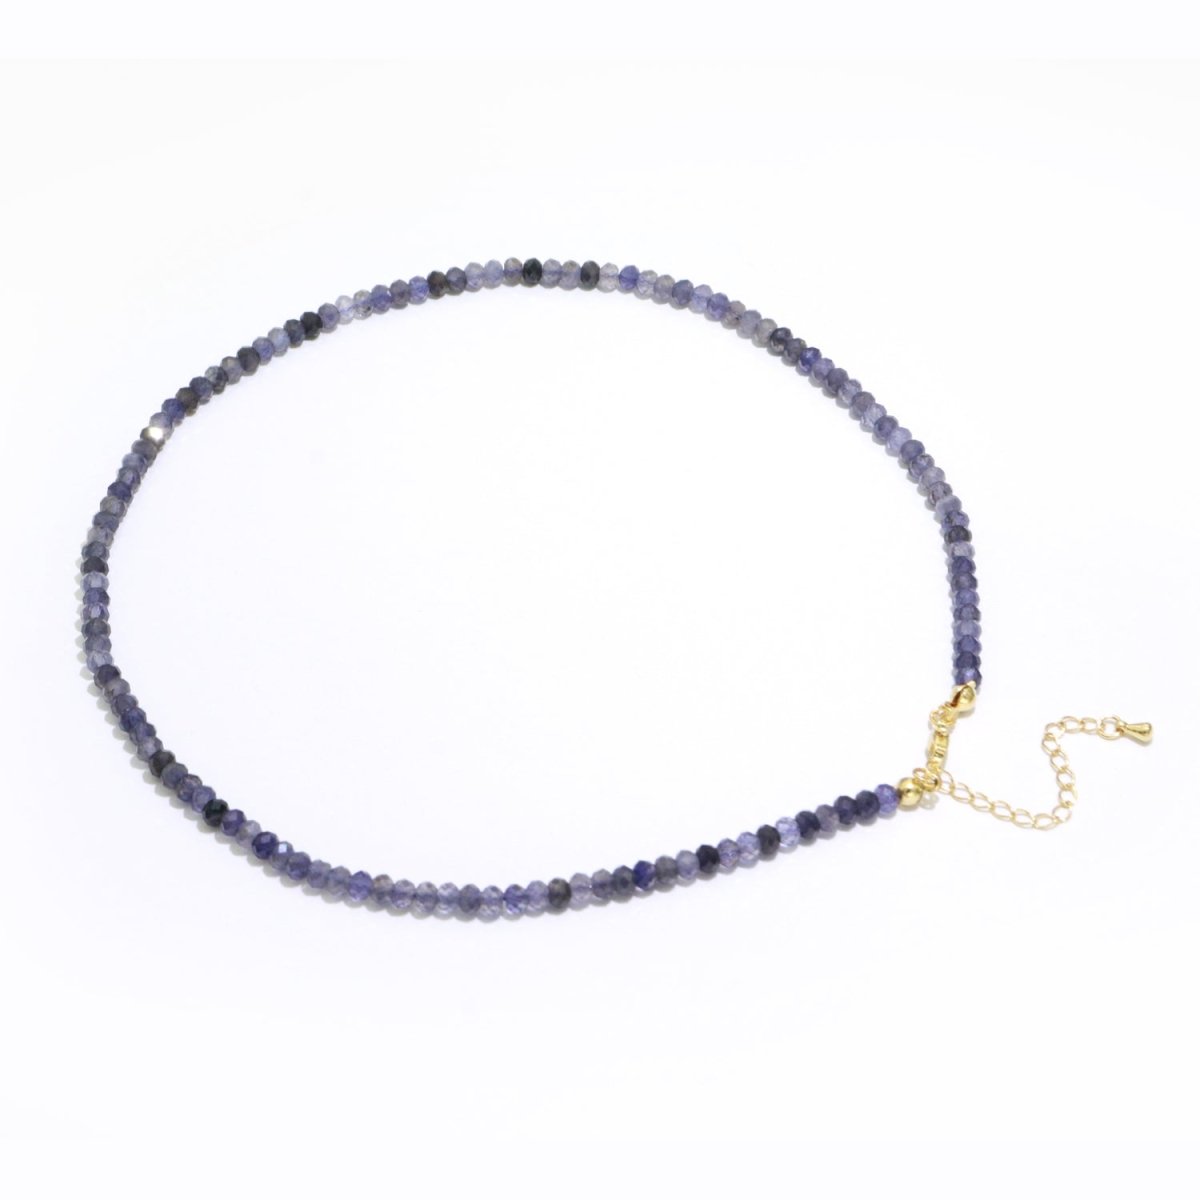 Blue Zircon stone bead Necklace Faceted 3.3mm Roundel Shape bead gorgeous natural Dark Purple gemstone Necklace | WA-257 Clearance Pricing - DLUXCA